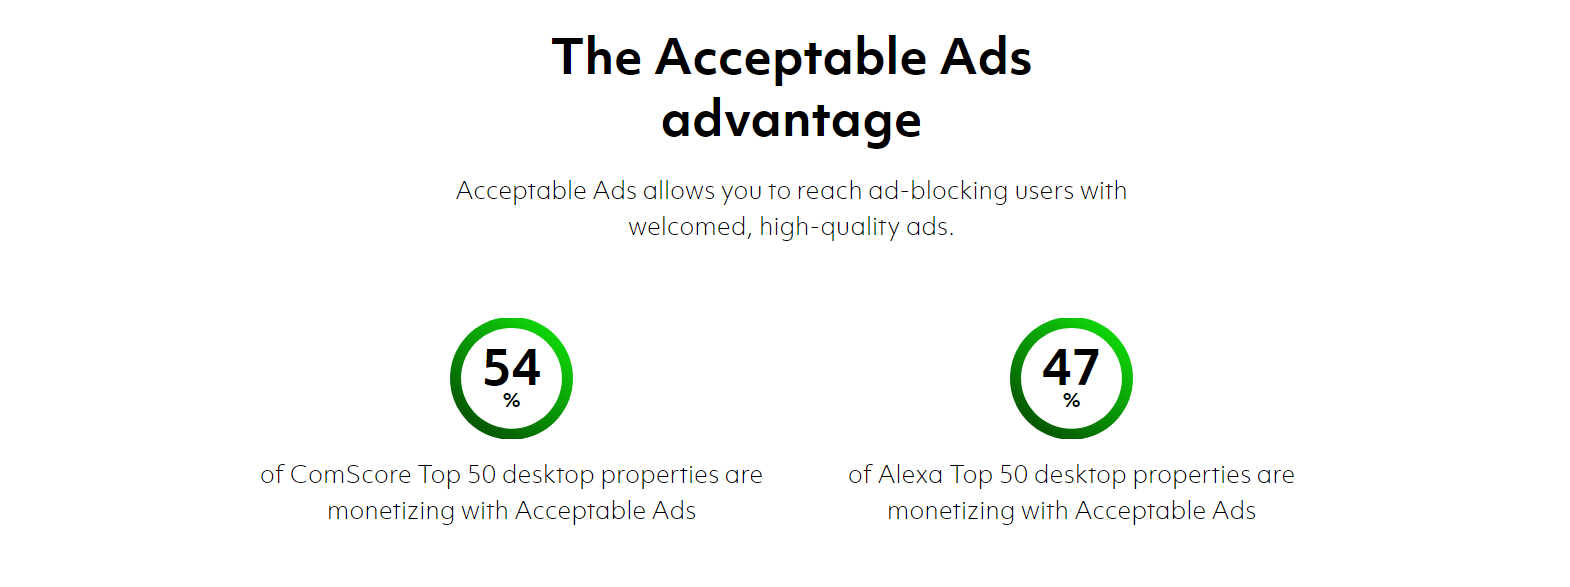 Acceptable ads